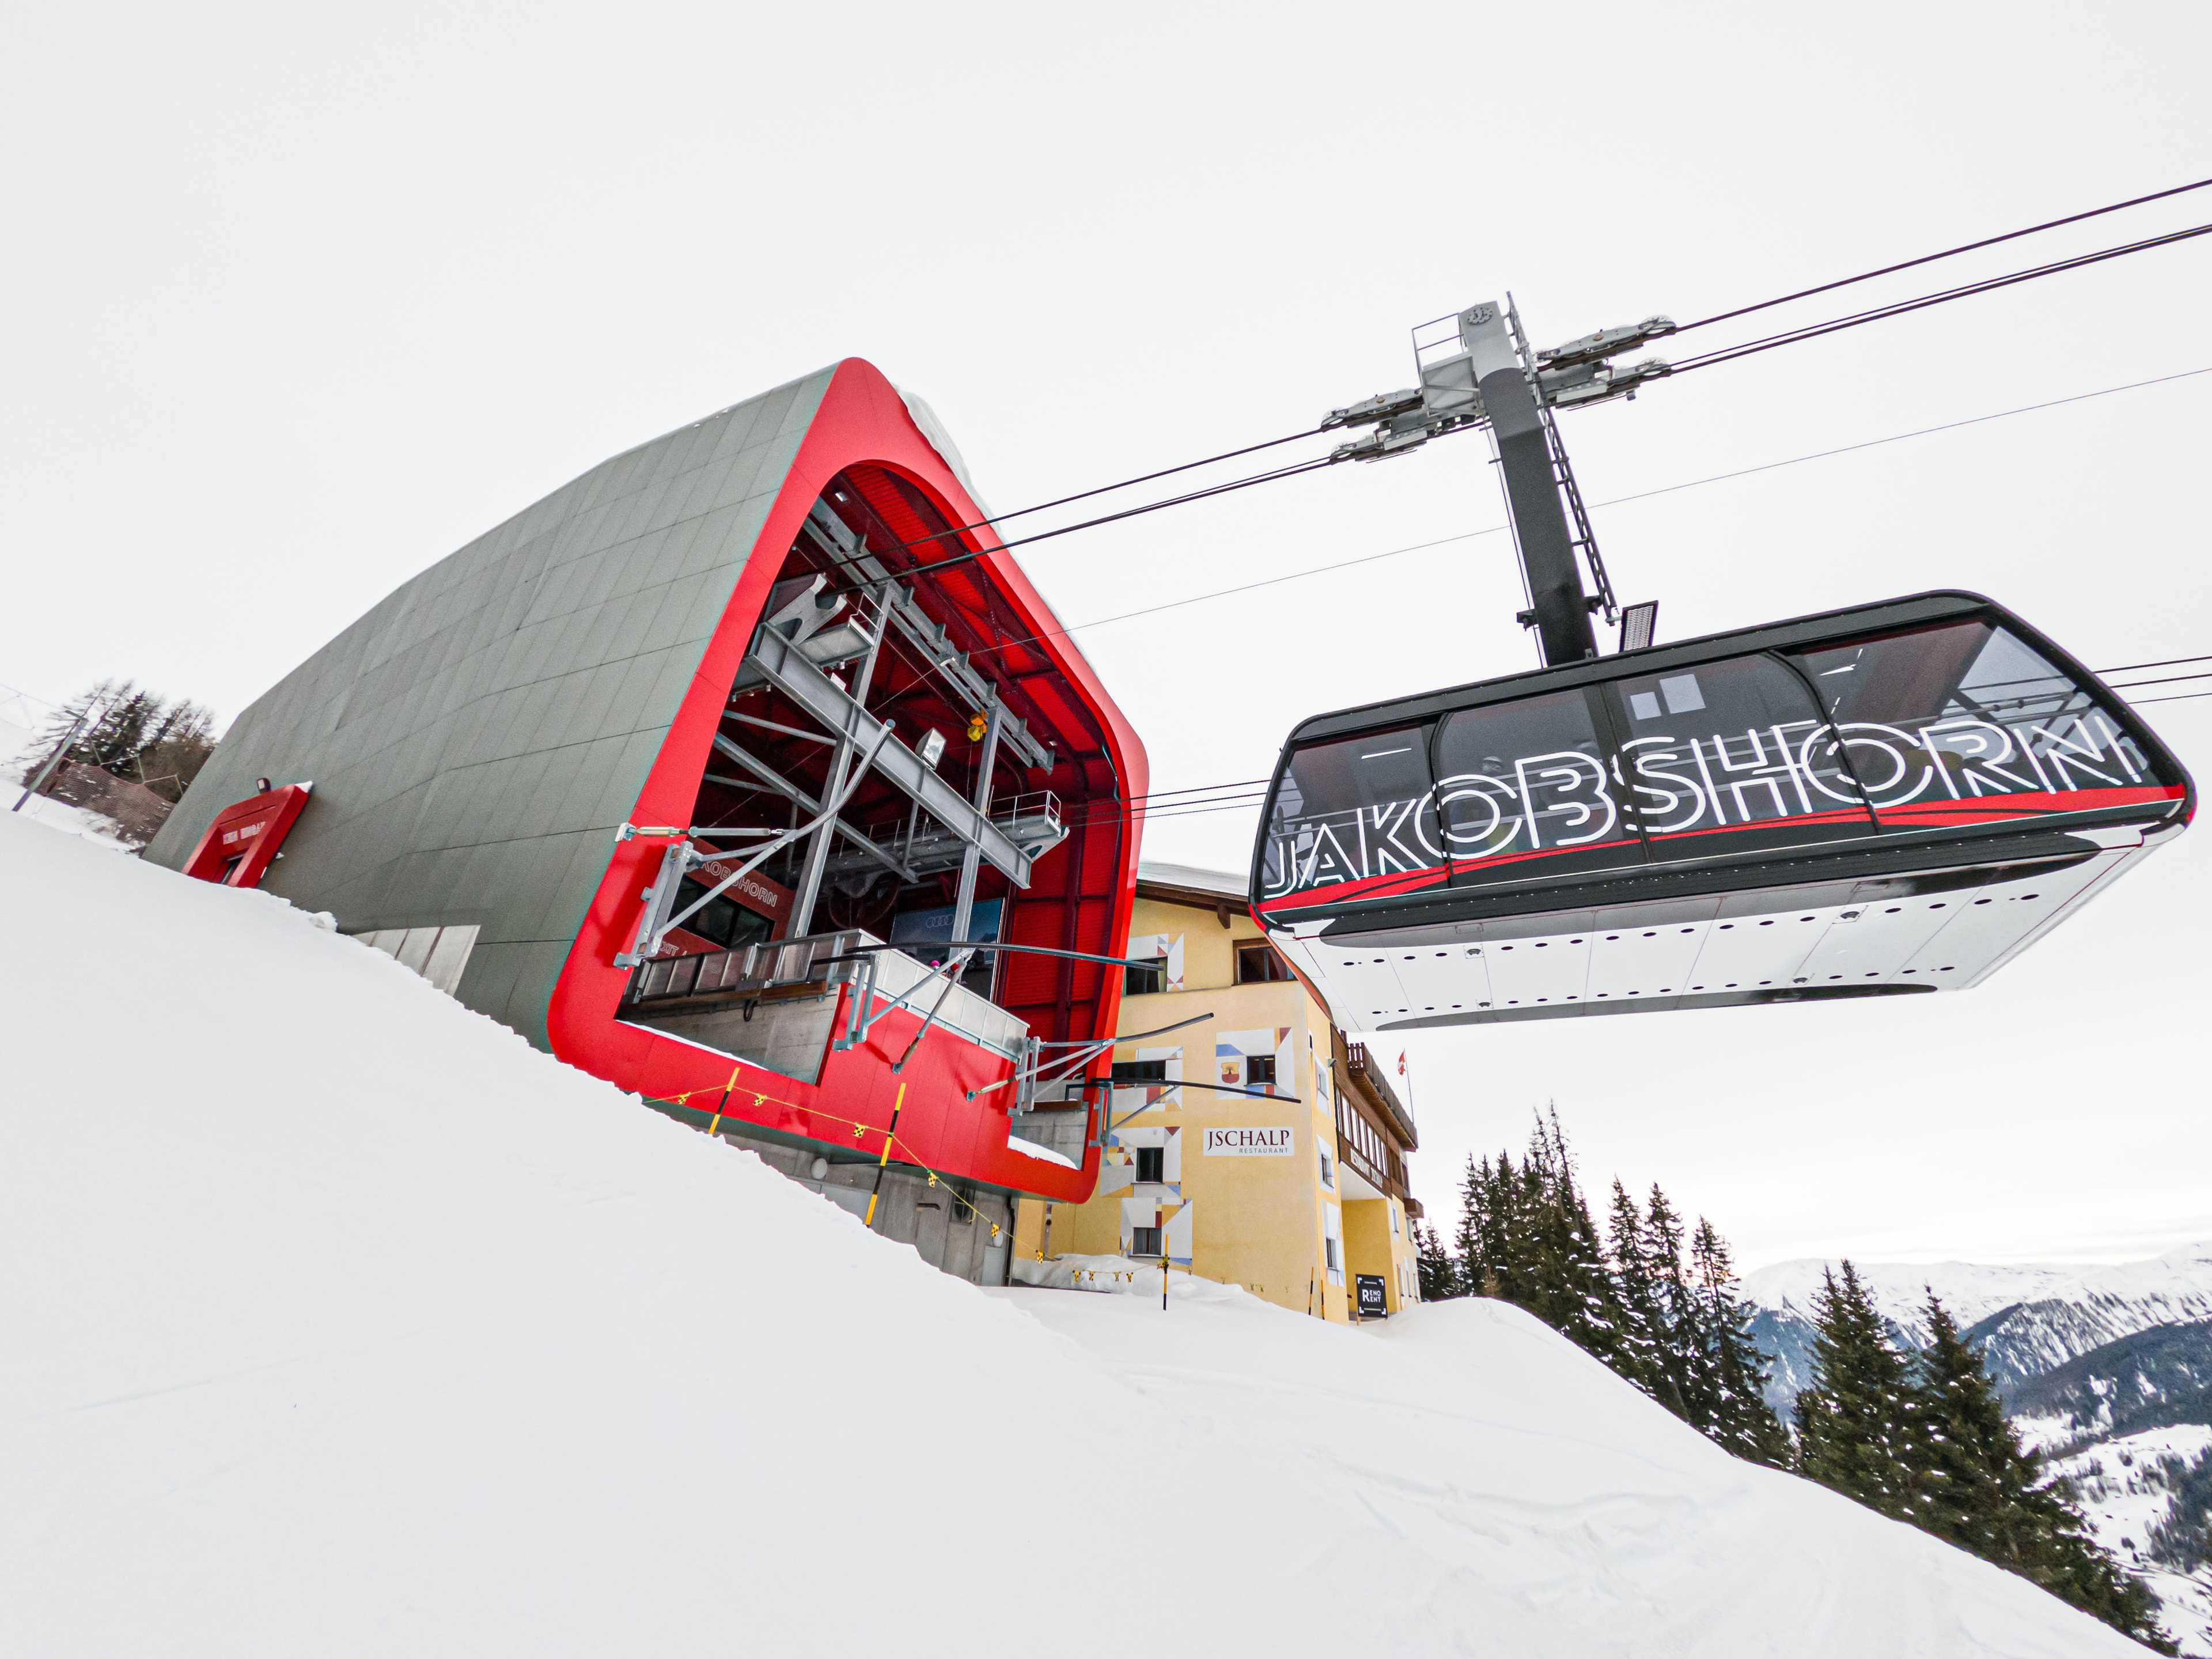 Mountain station of Davos-Jschalp cable car to Jakobshorn